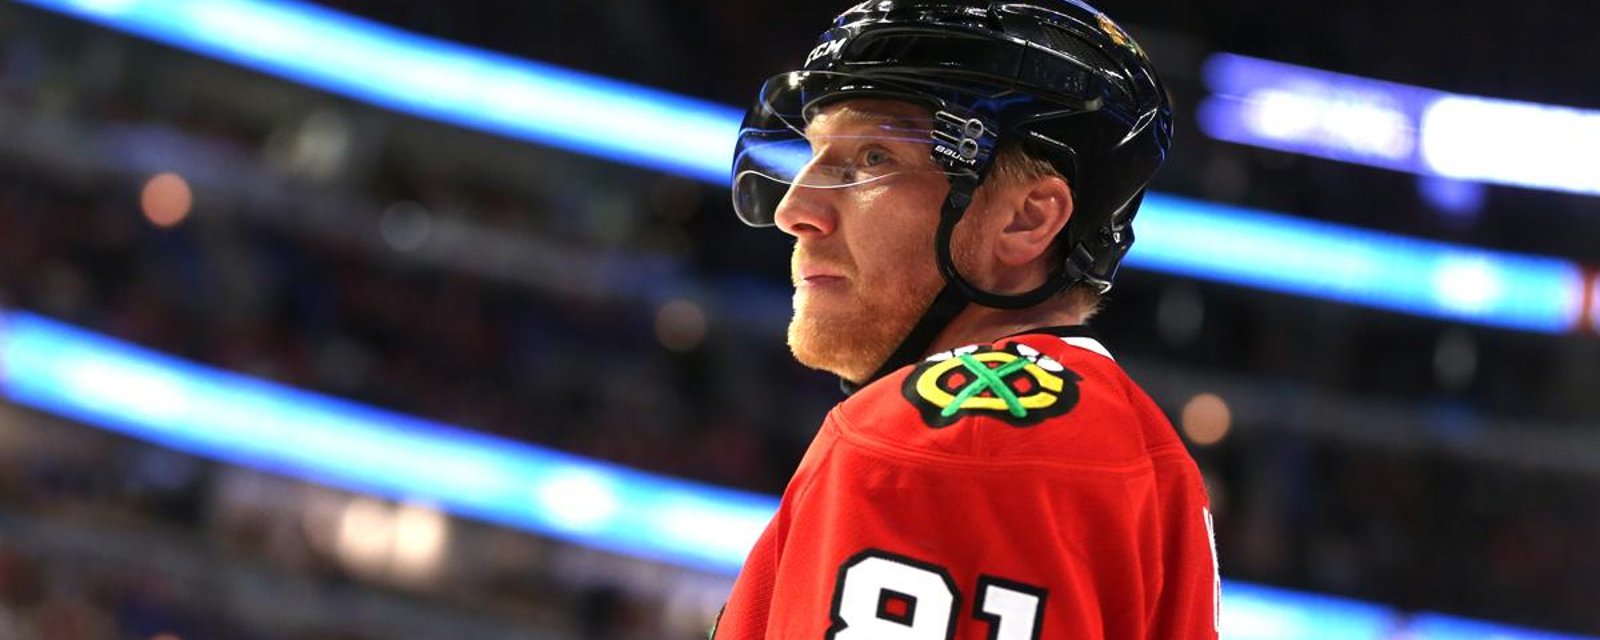 Hossa in the race for coveted award! 